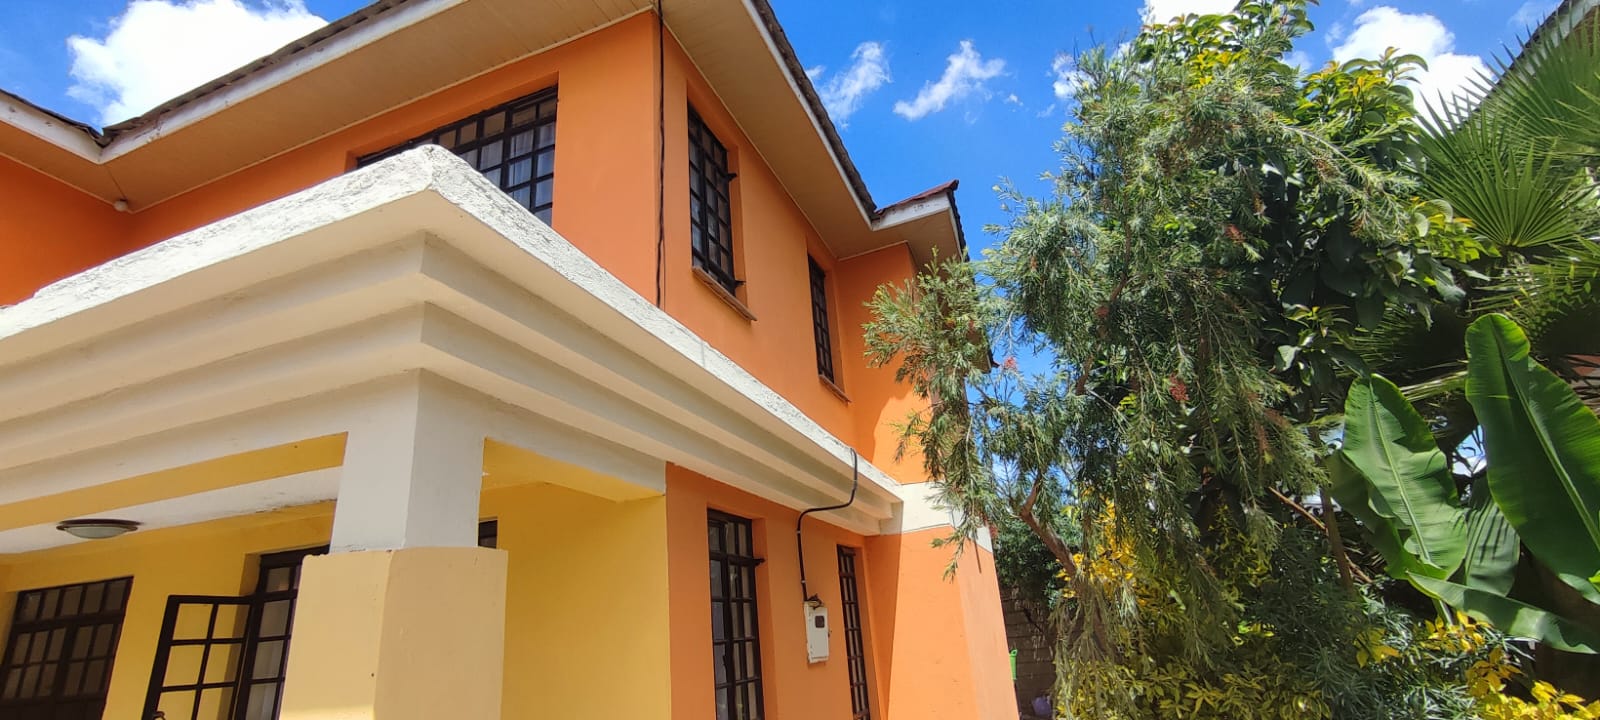 4br corner house all ensuite with dsq.. Gated community of 5 units each on 50*100 Yukos estate behind total. Just 500m off the highway. Price 10 M Musilli Homes